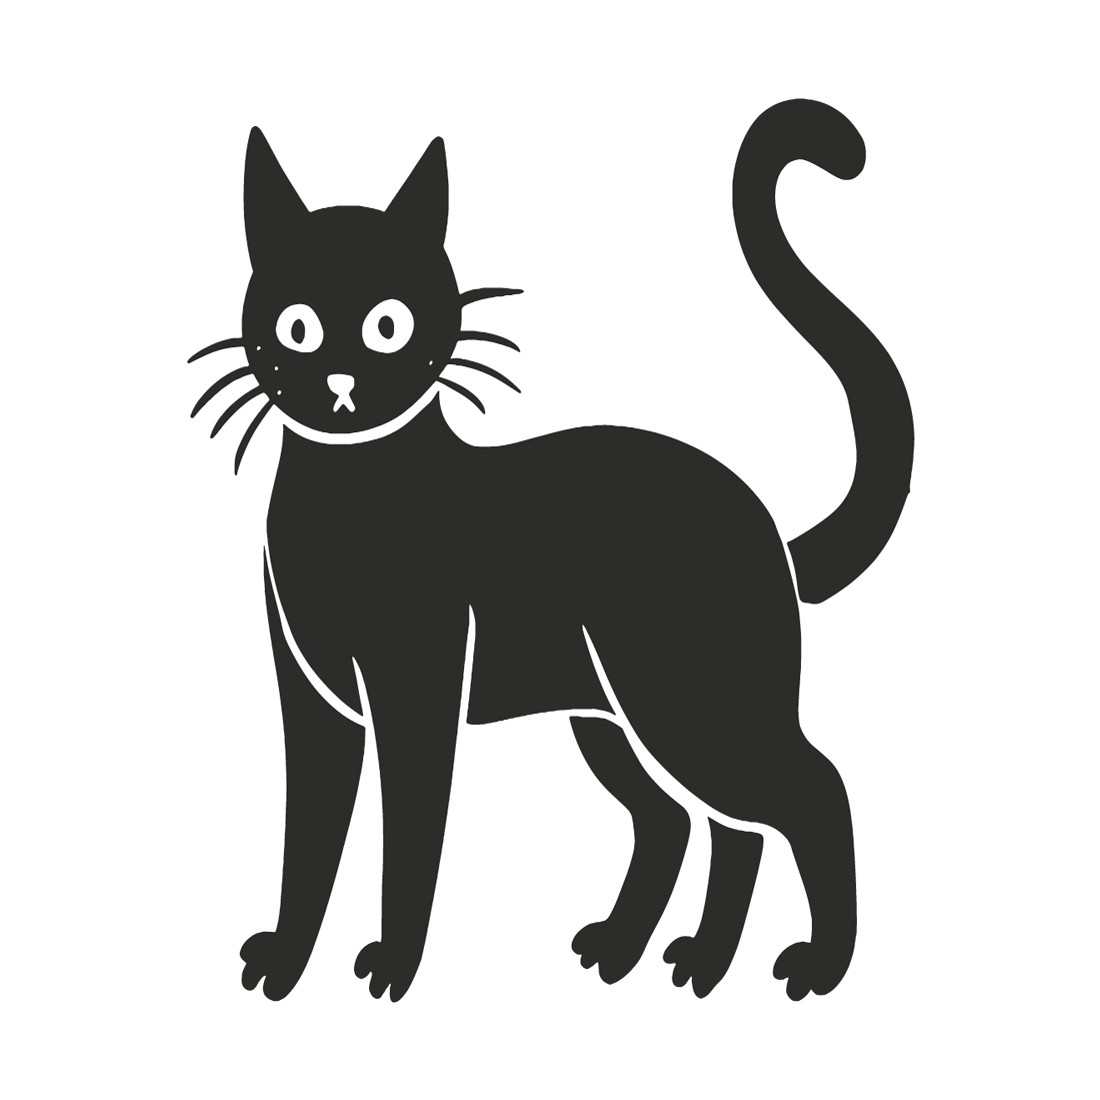 Hand drawn cat silhouette preview image.